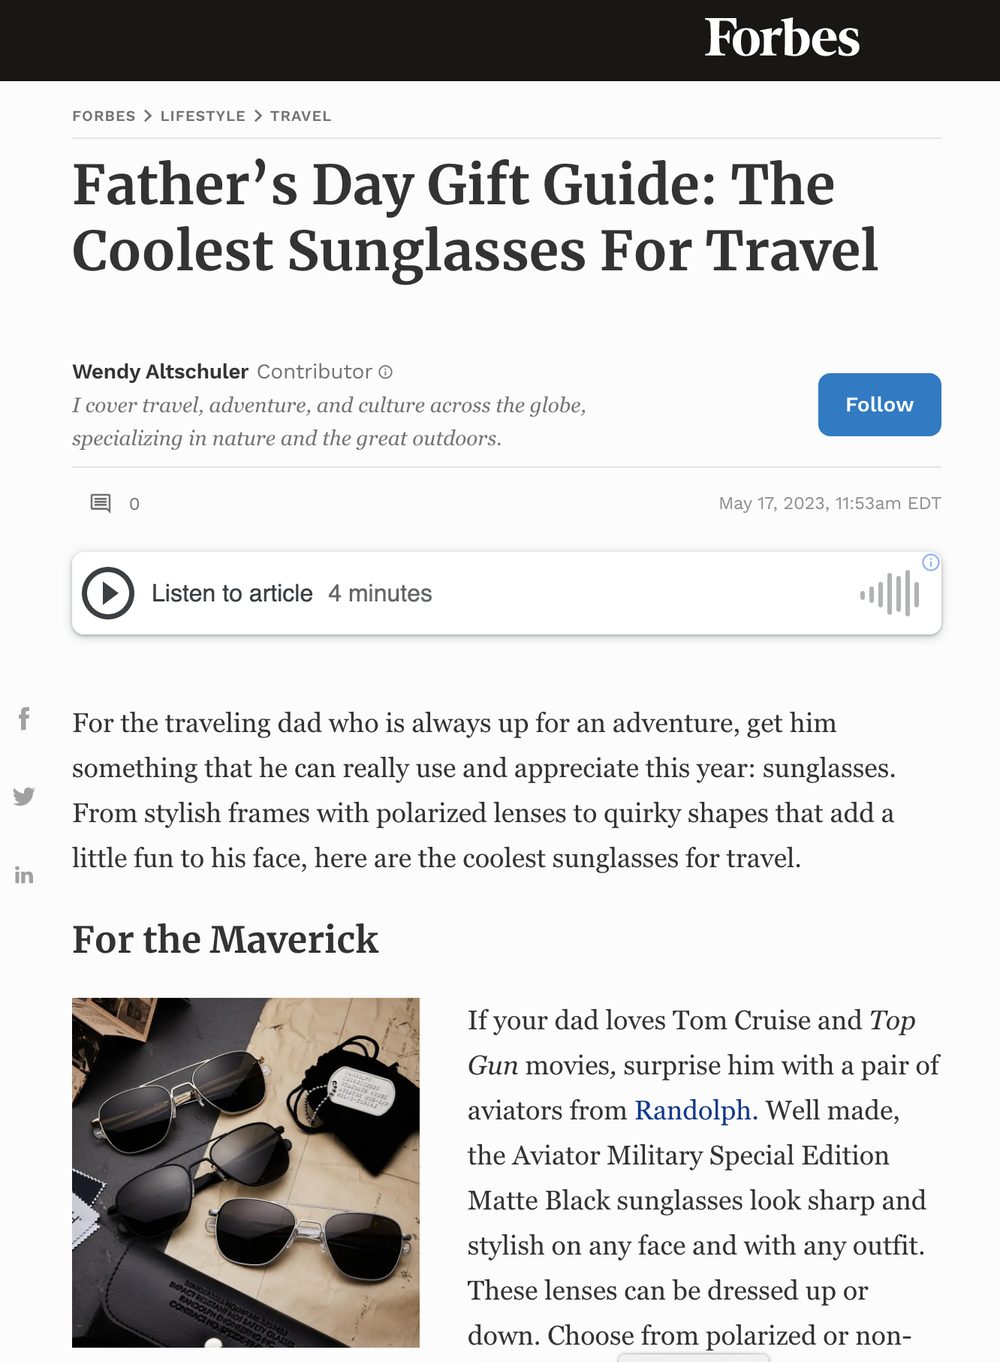 Father’s Day Gift Guide: The Coolest Sunglasses For Travel